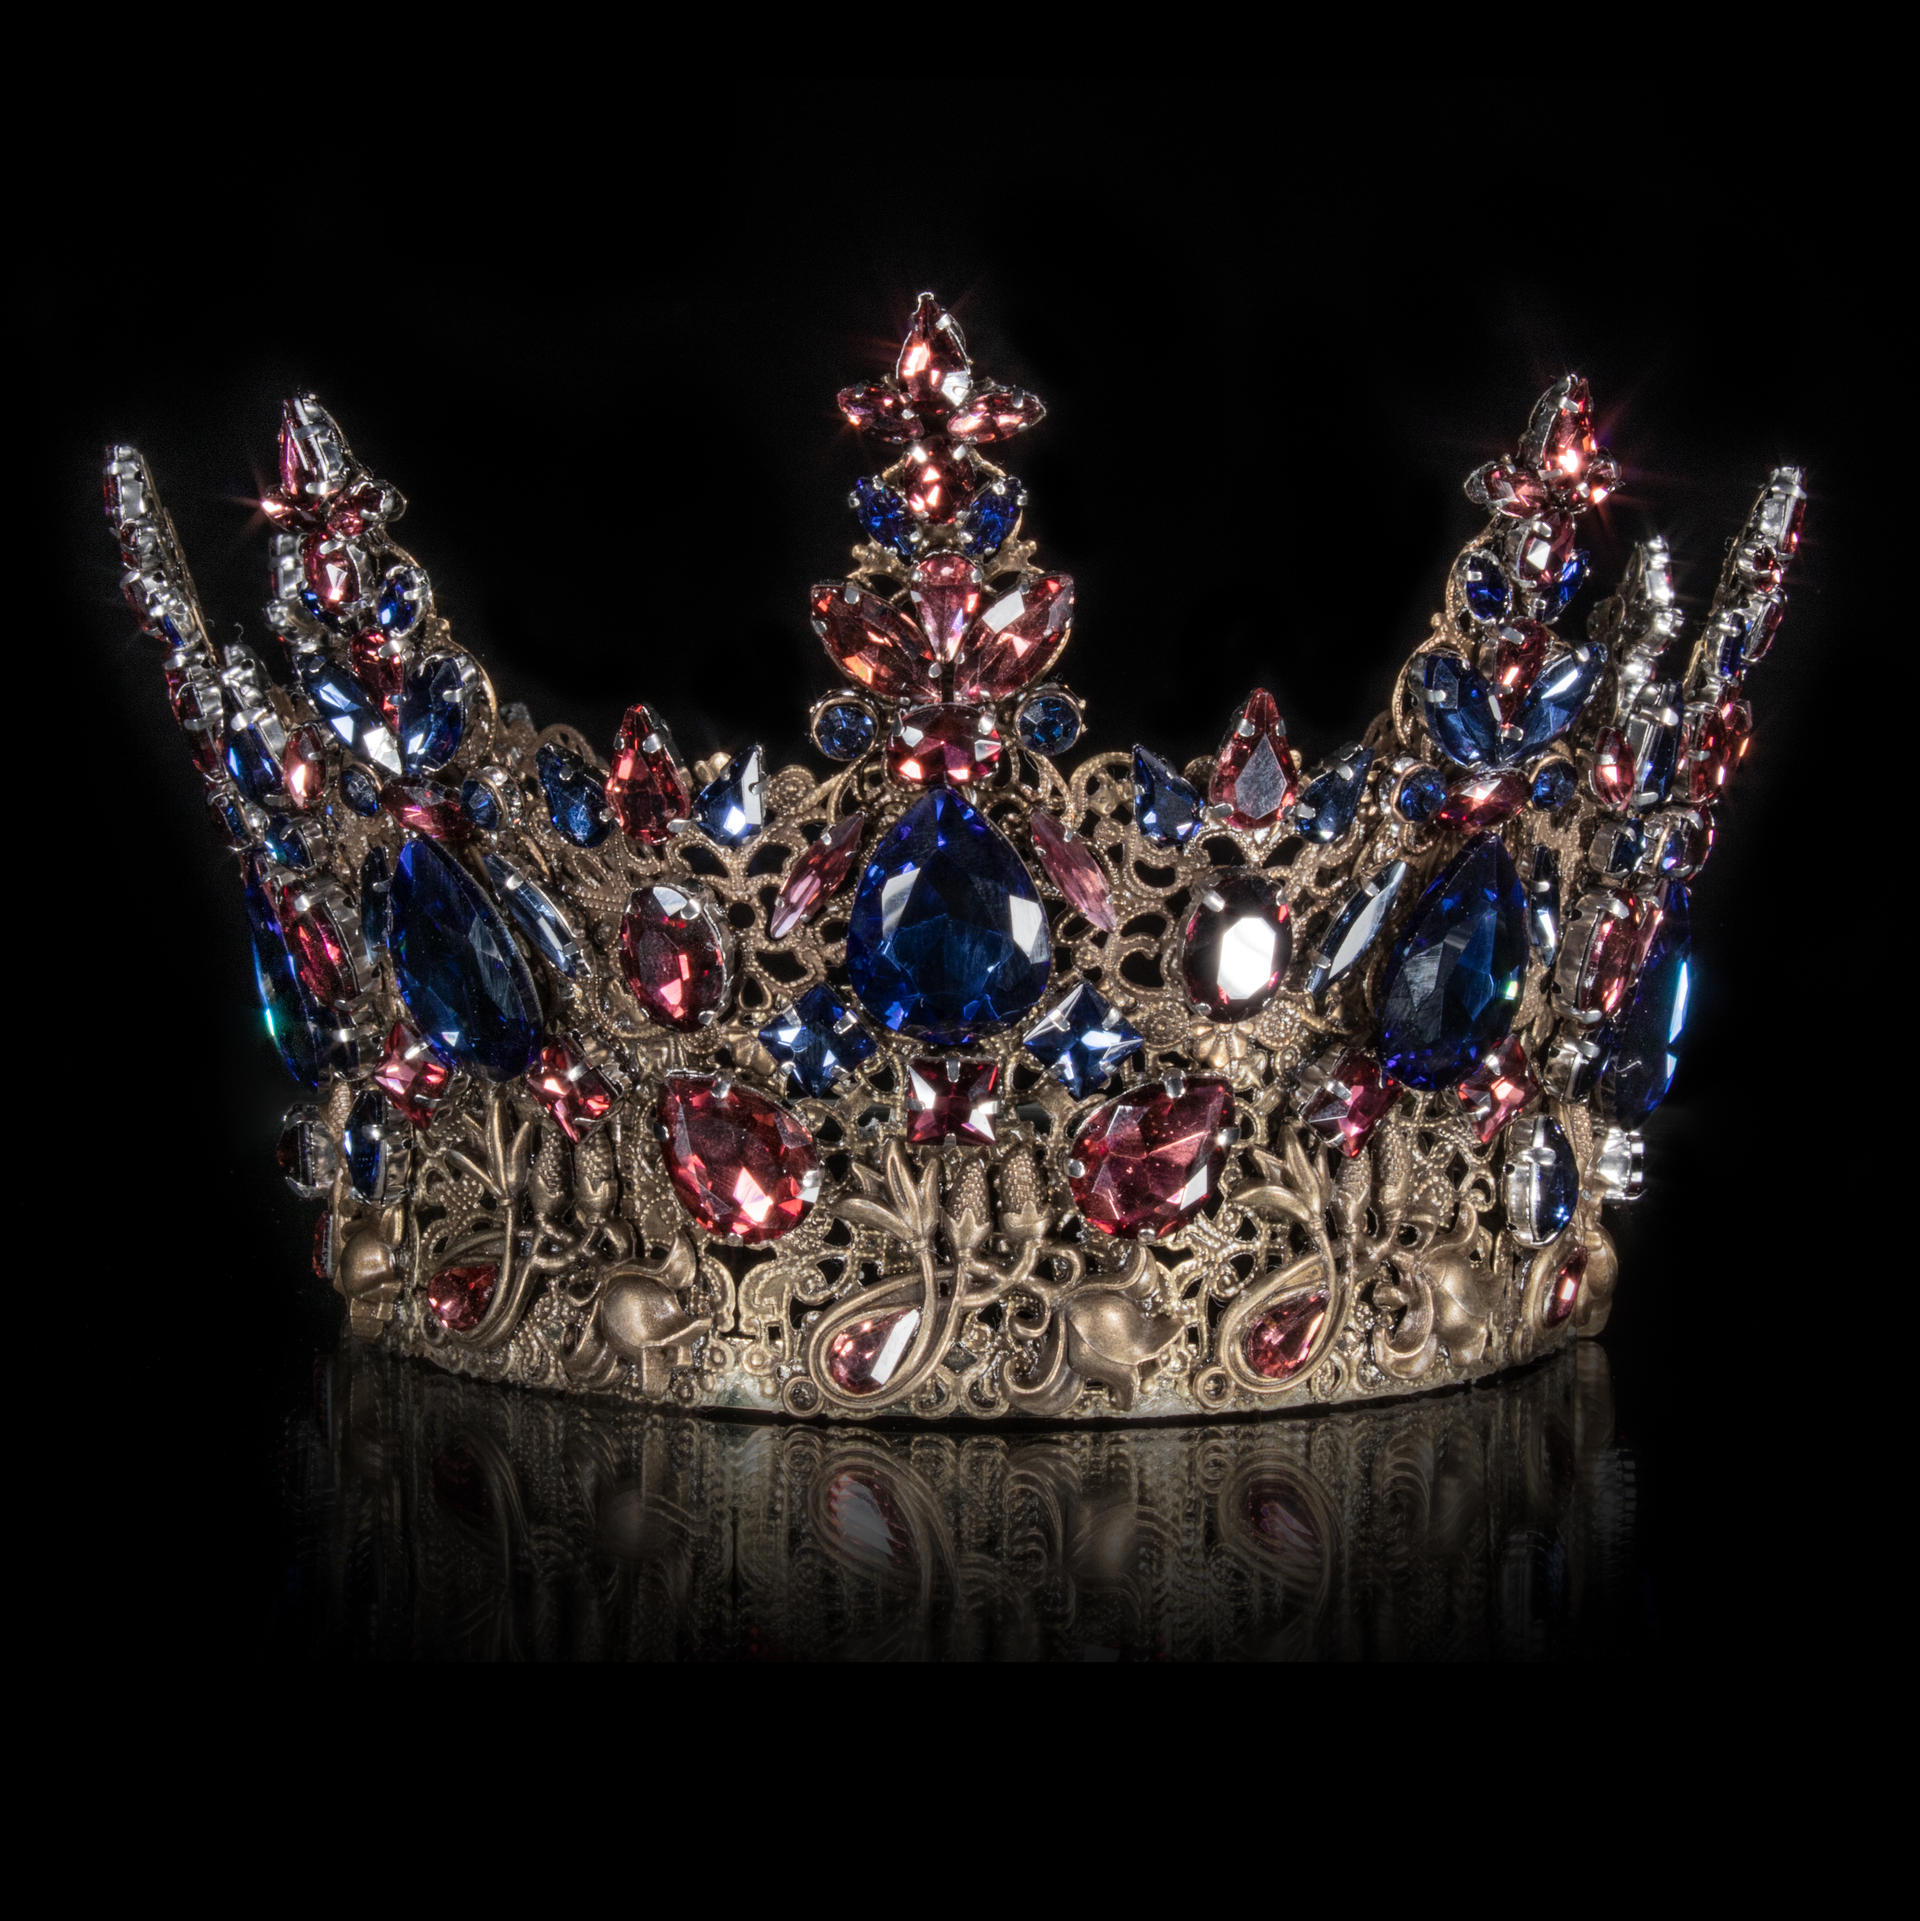 Crown 2 by Panopticon-Stock on DeviantArt